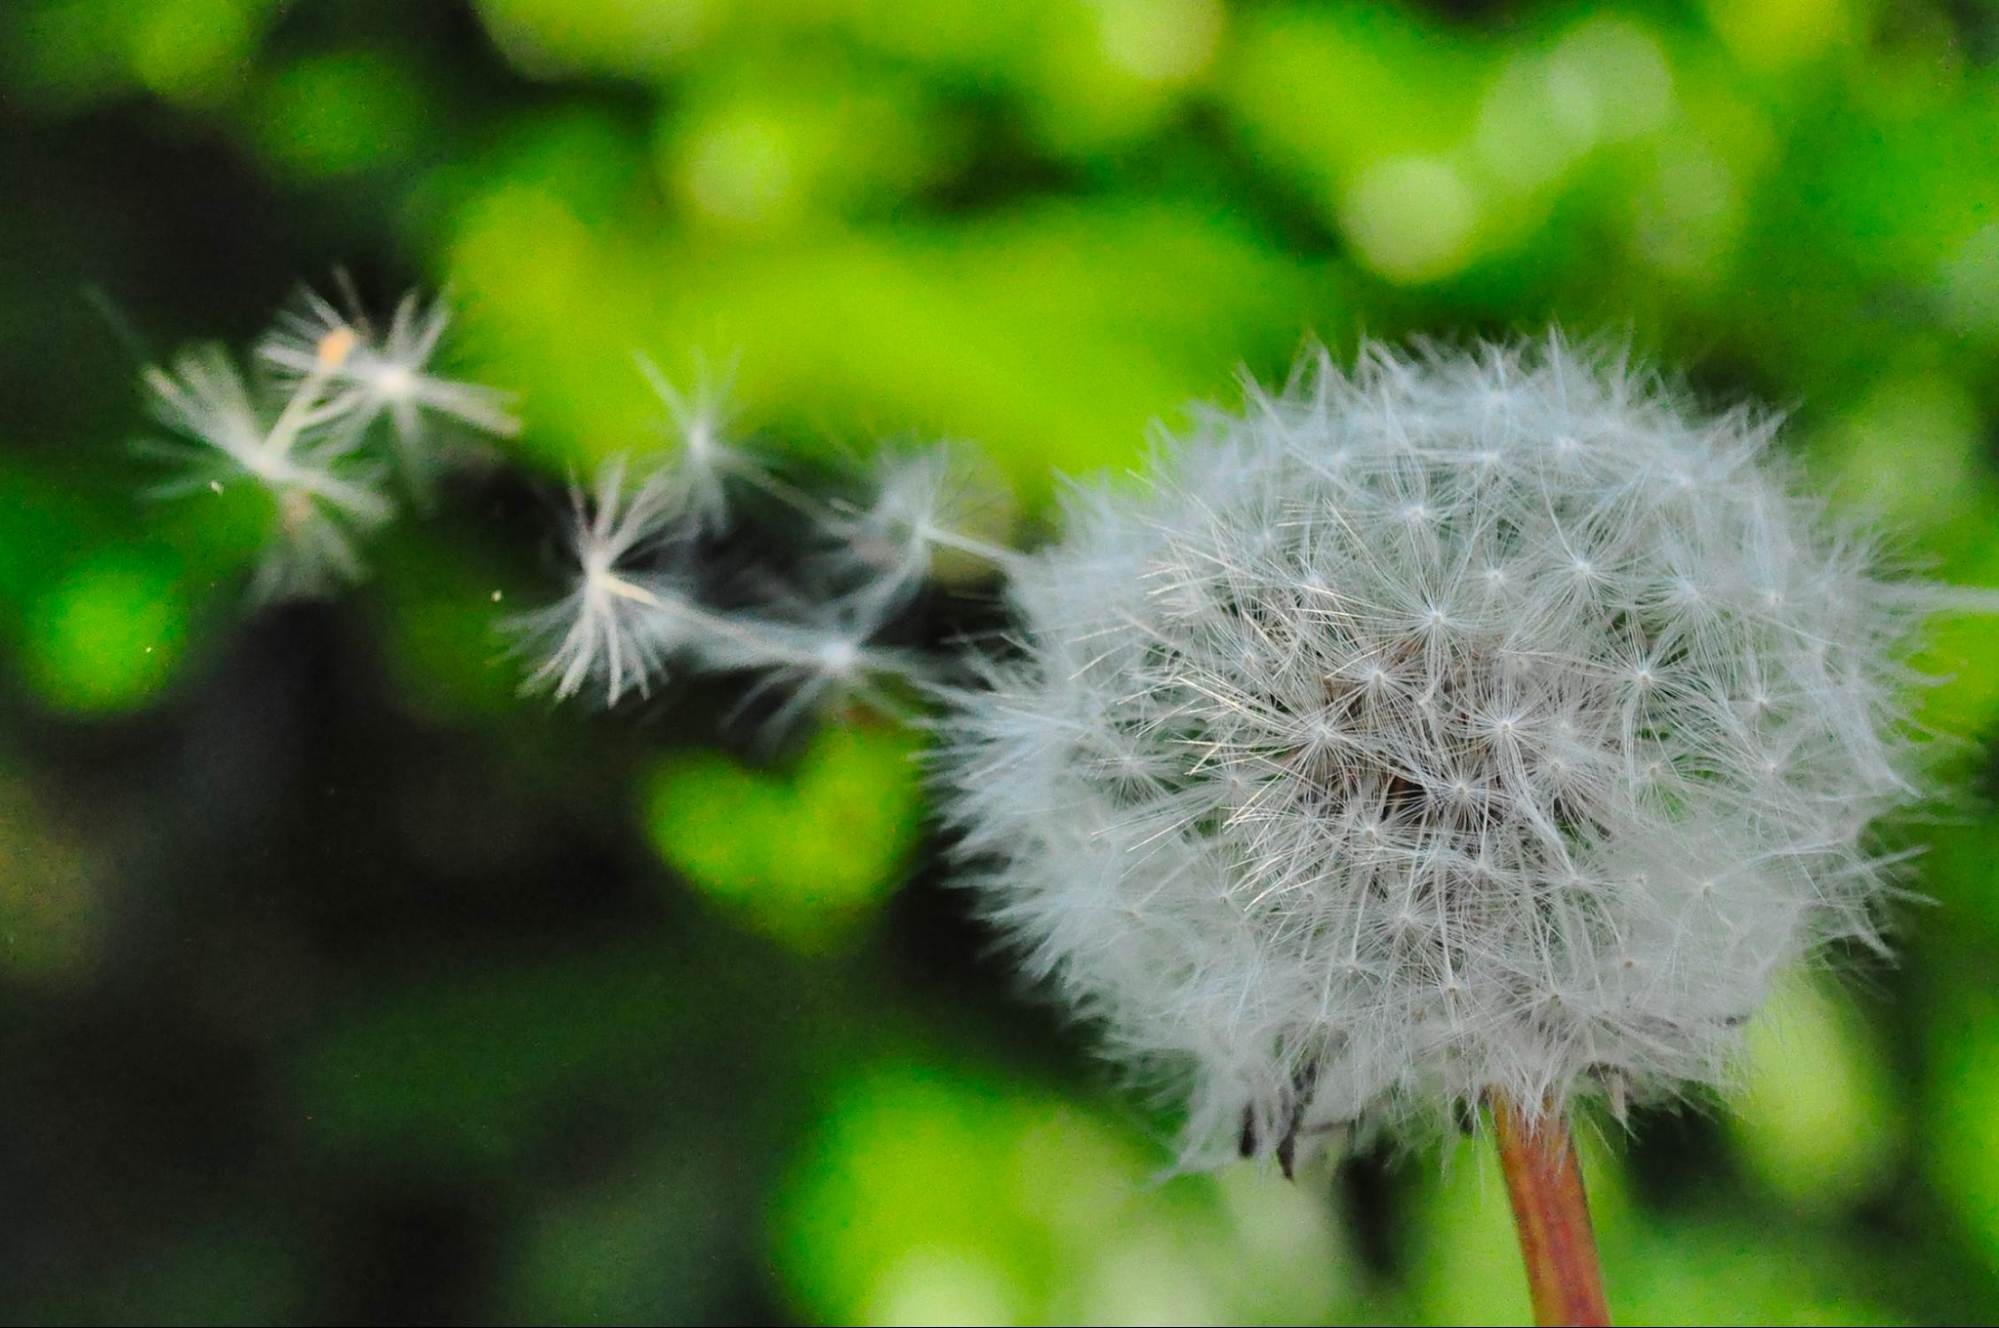 This is an image of dandelion seeds blowing in the wind.